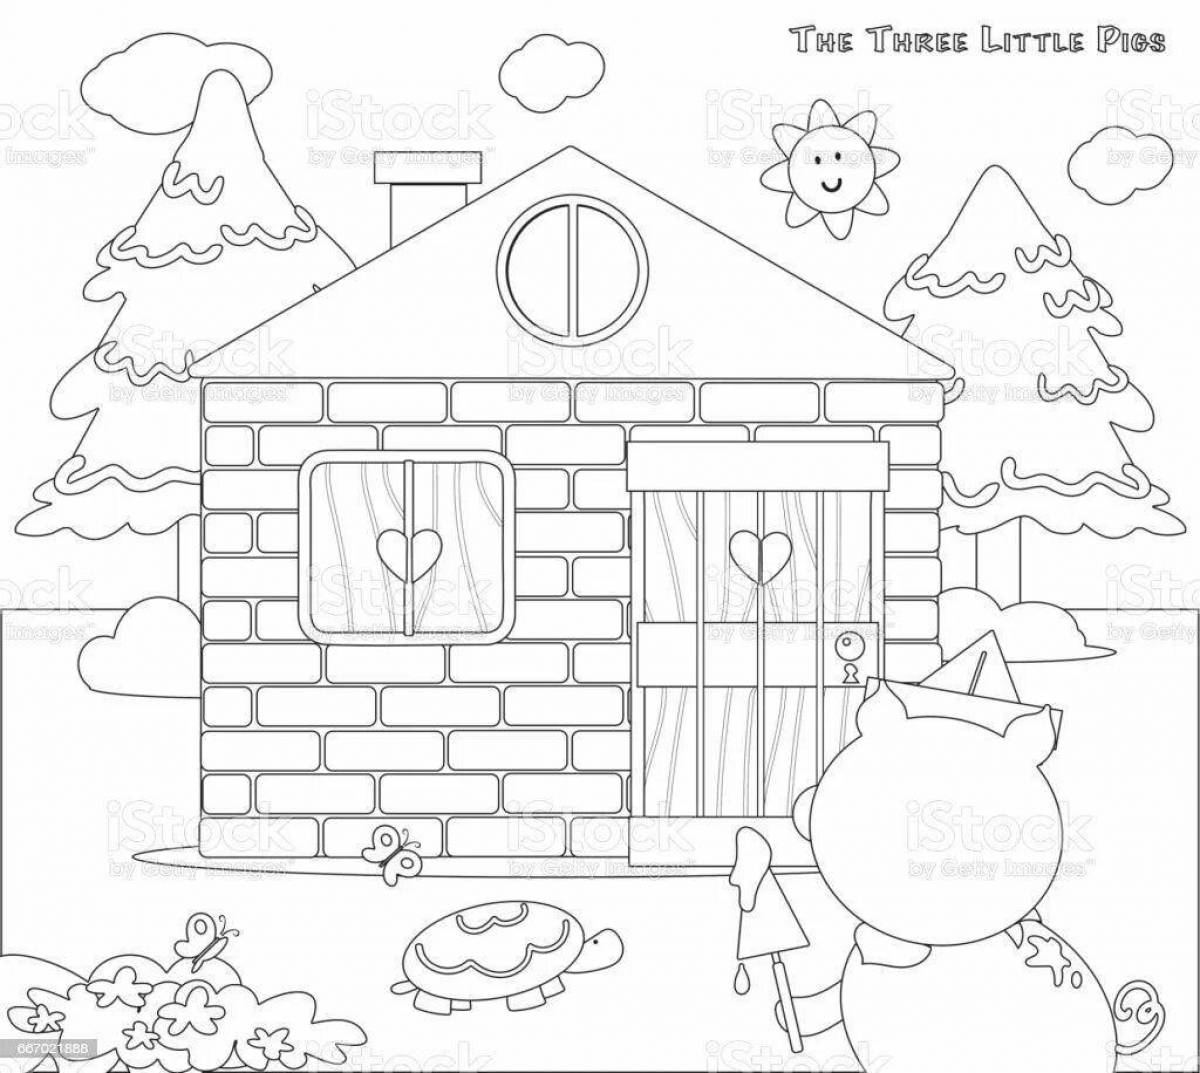 Charming house wish game price coloring book